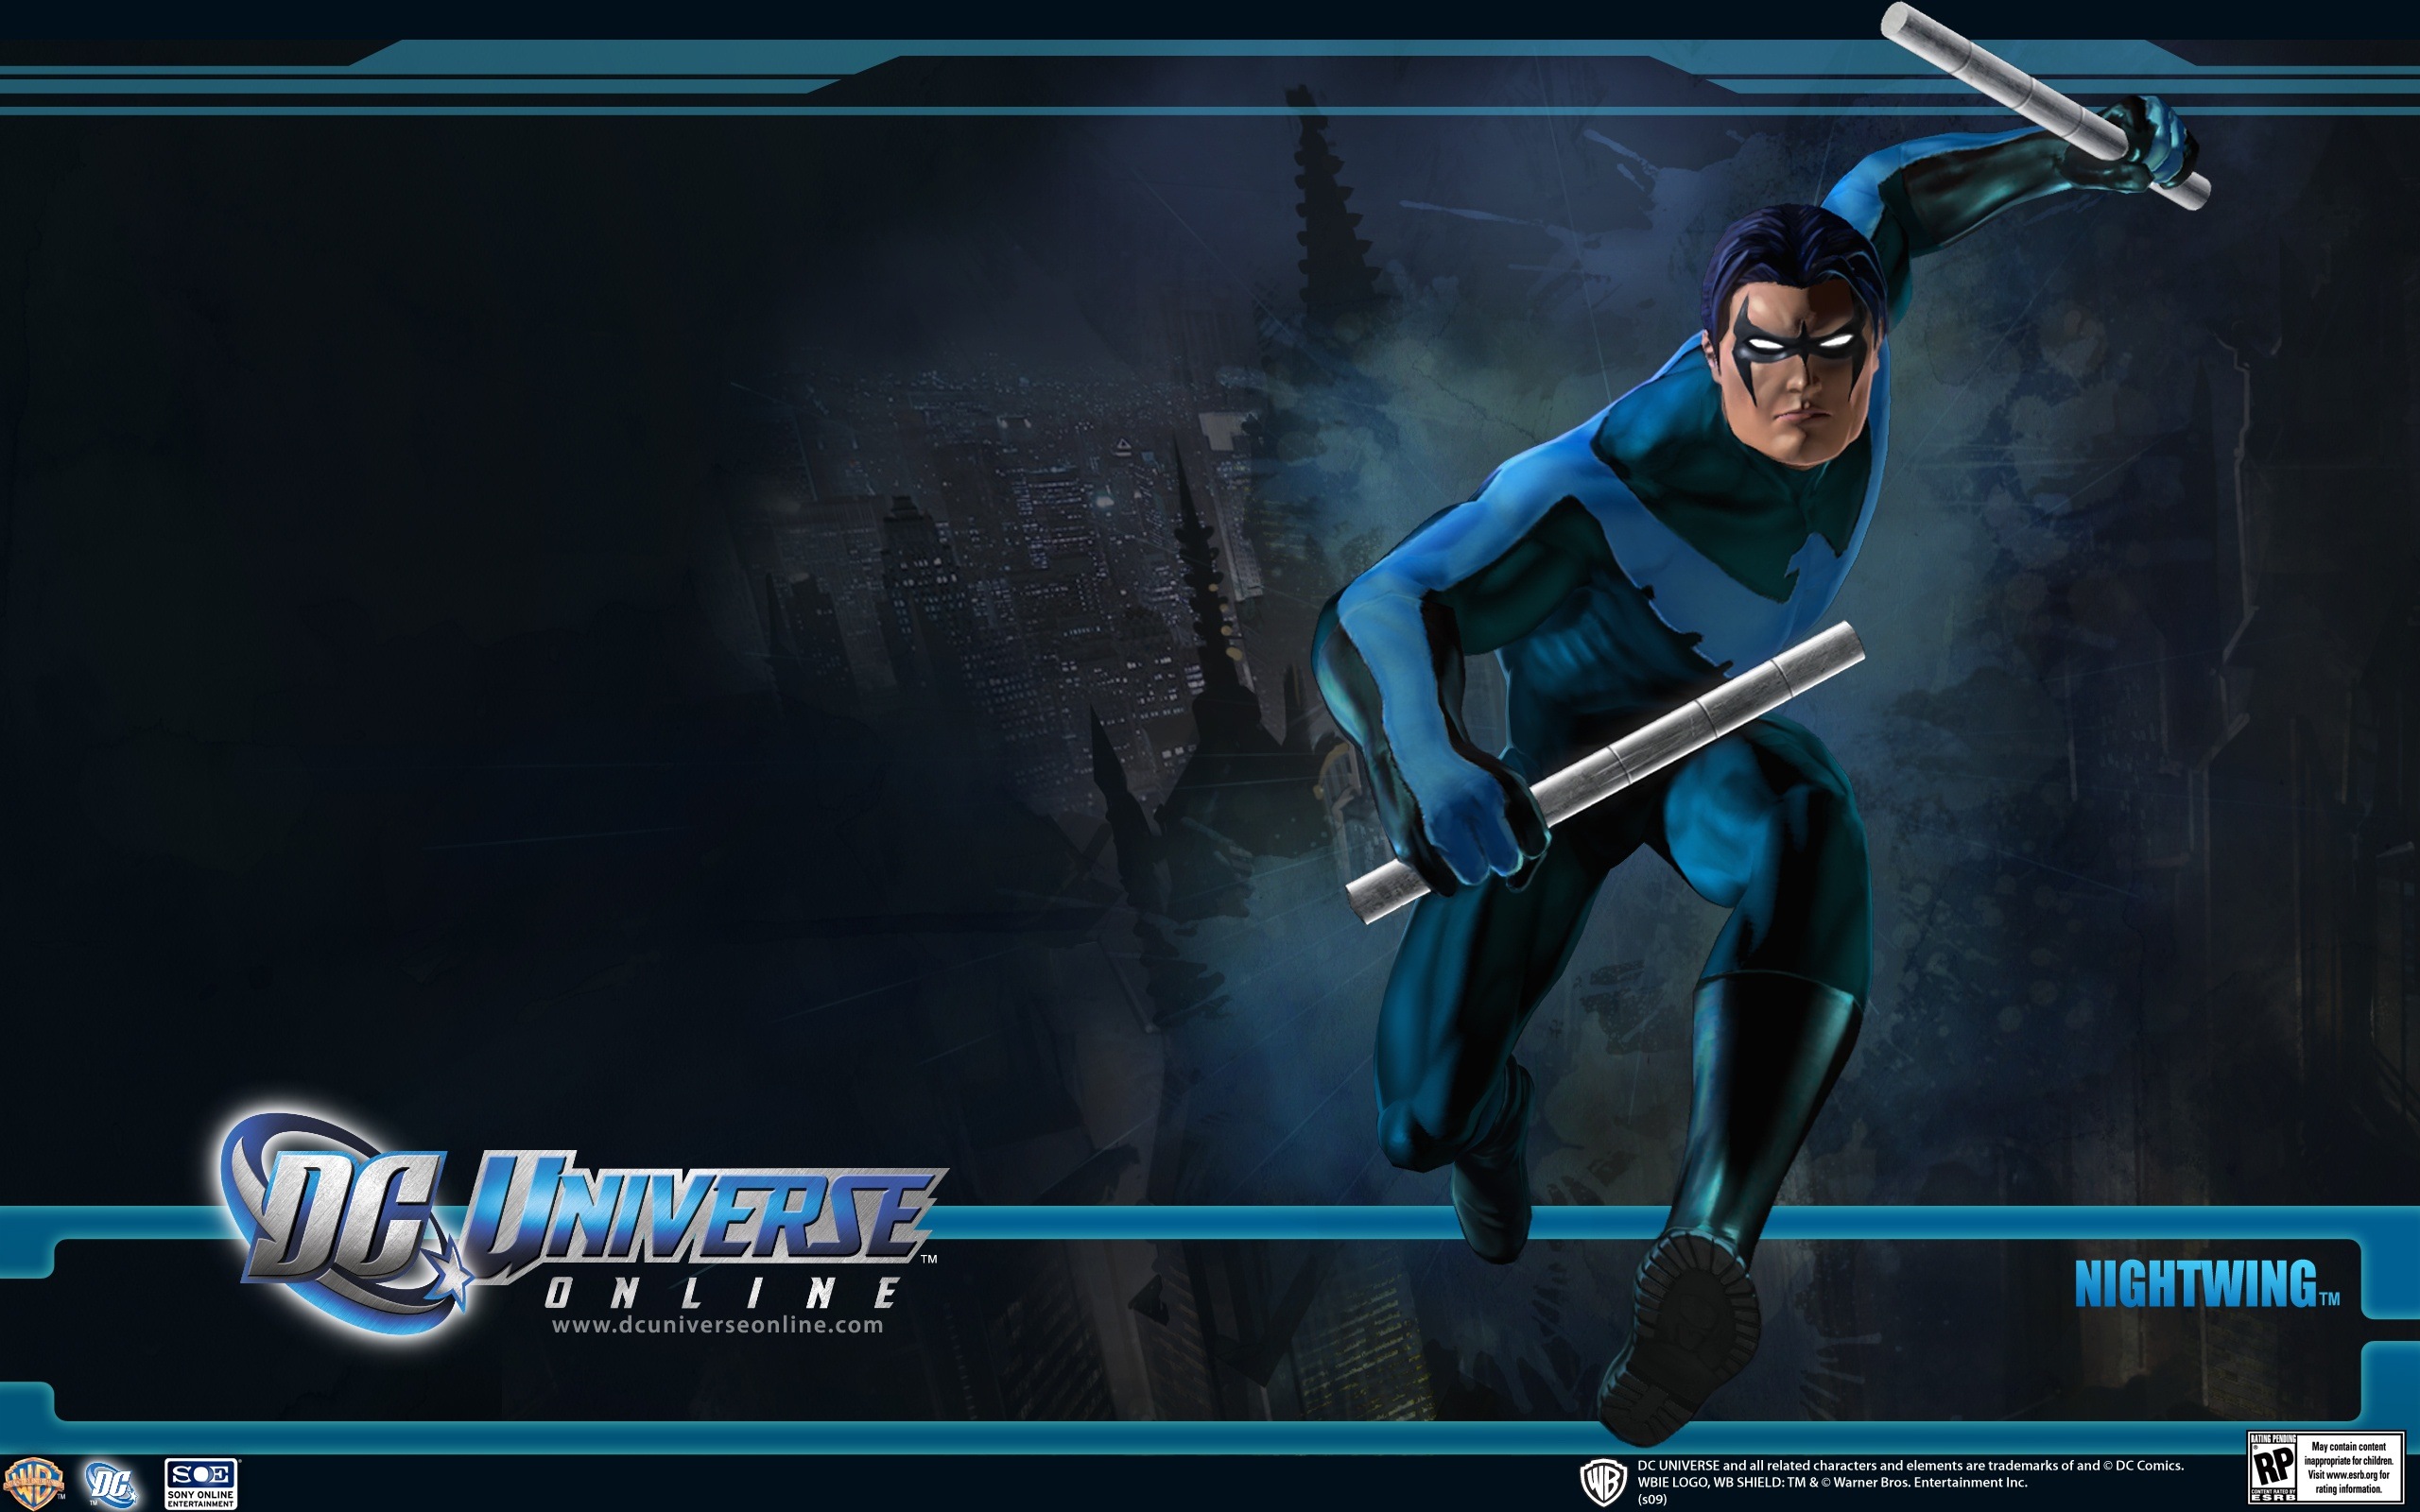 DC Universe Online HD game wallpapers #22 - 2560x1600